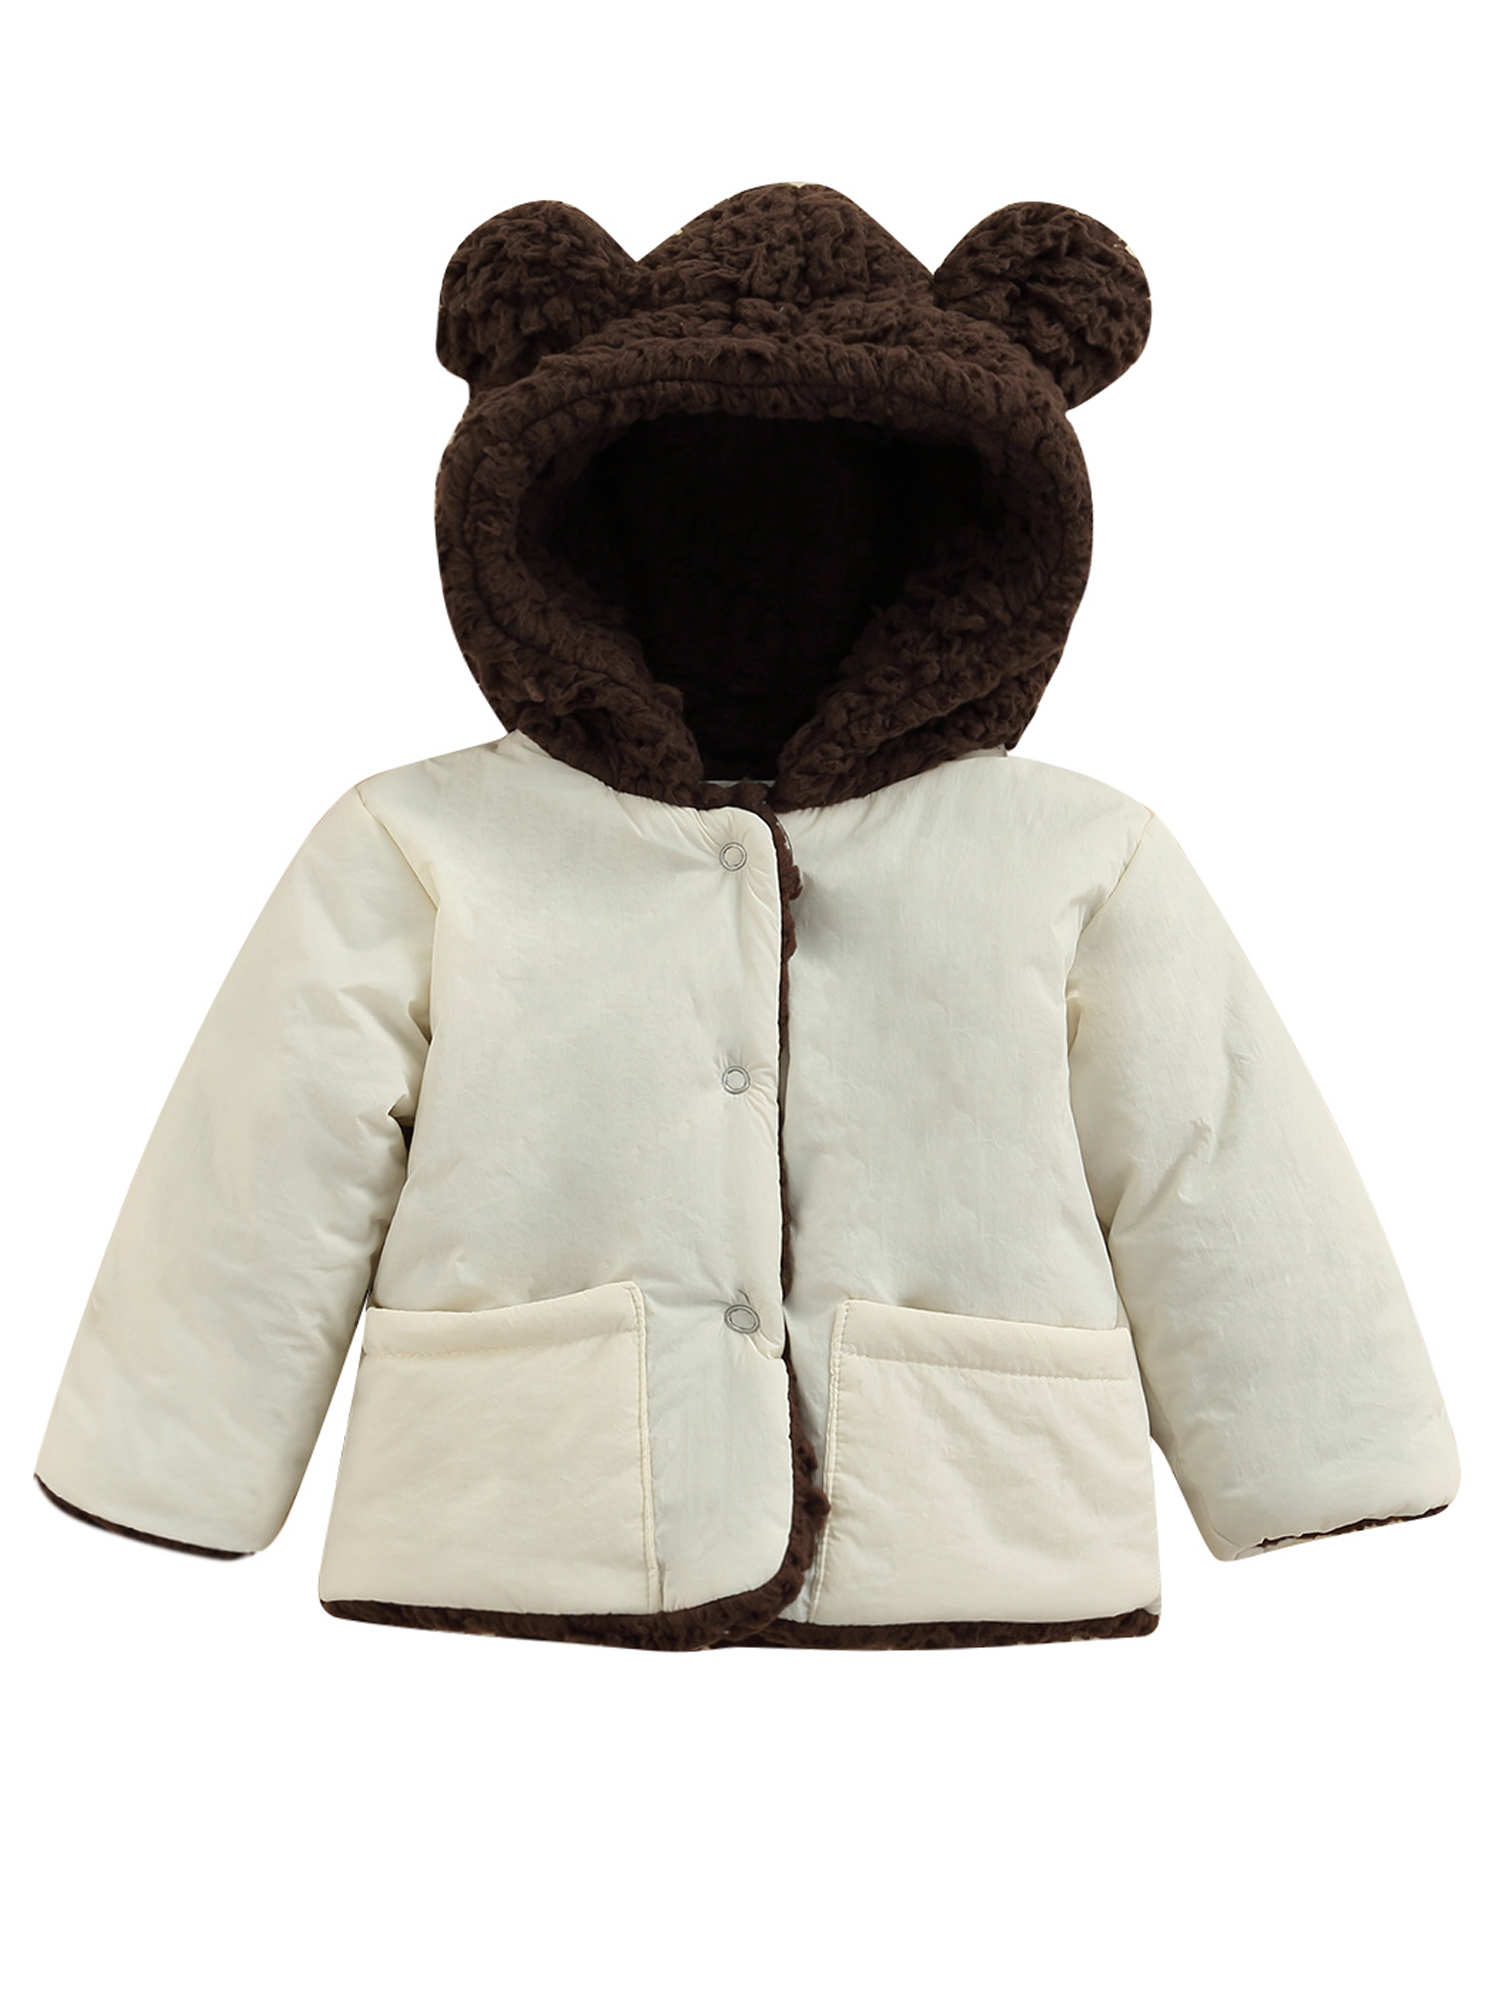 Pudcoco Baby Winter Hooded Coat Long Sleeve Button-down Wadded Jacket - image 1 of 6